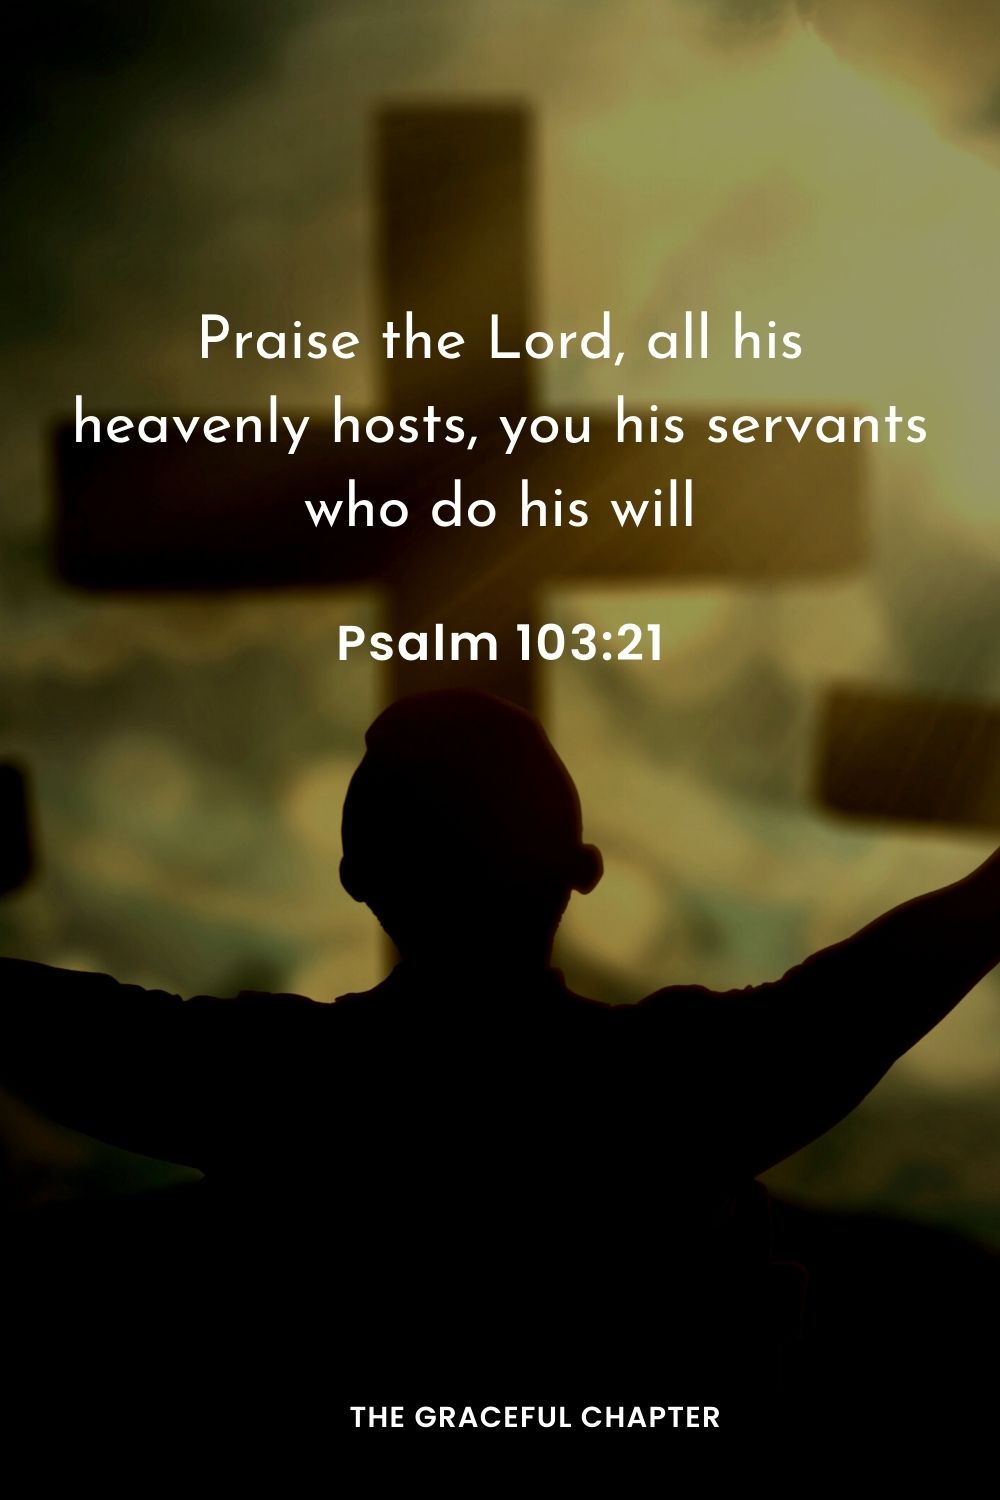 Praise the Lord, all his heavenly hosts, you his servants who do his will